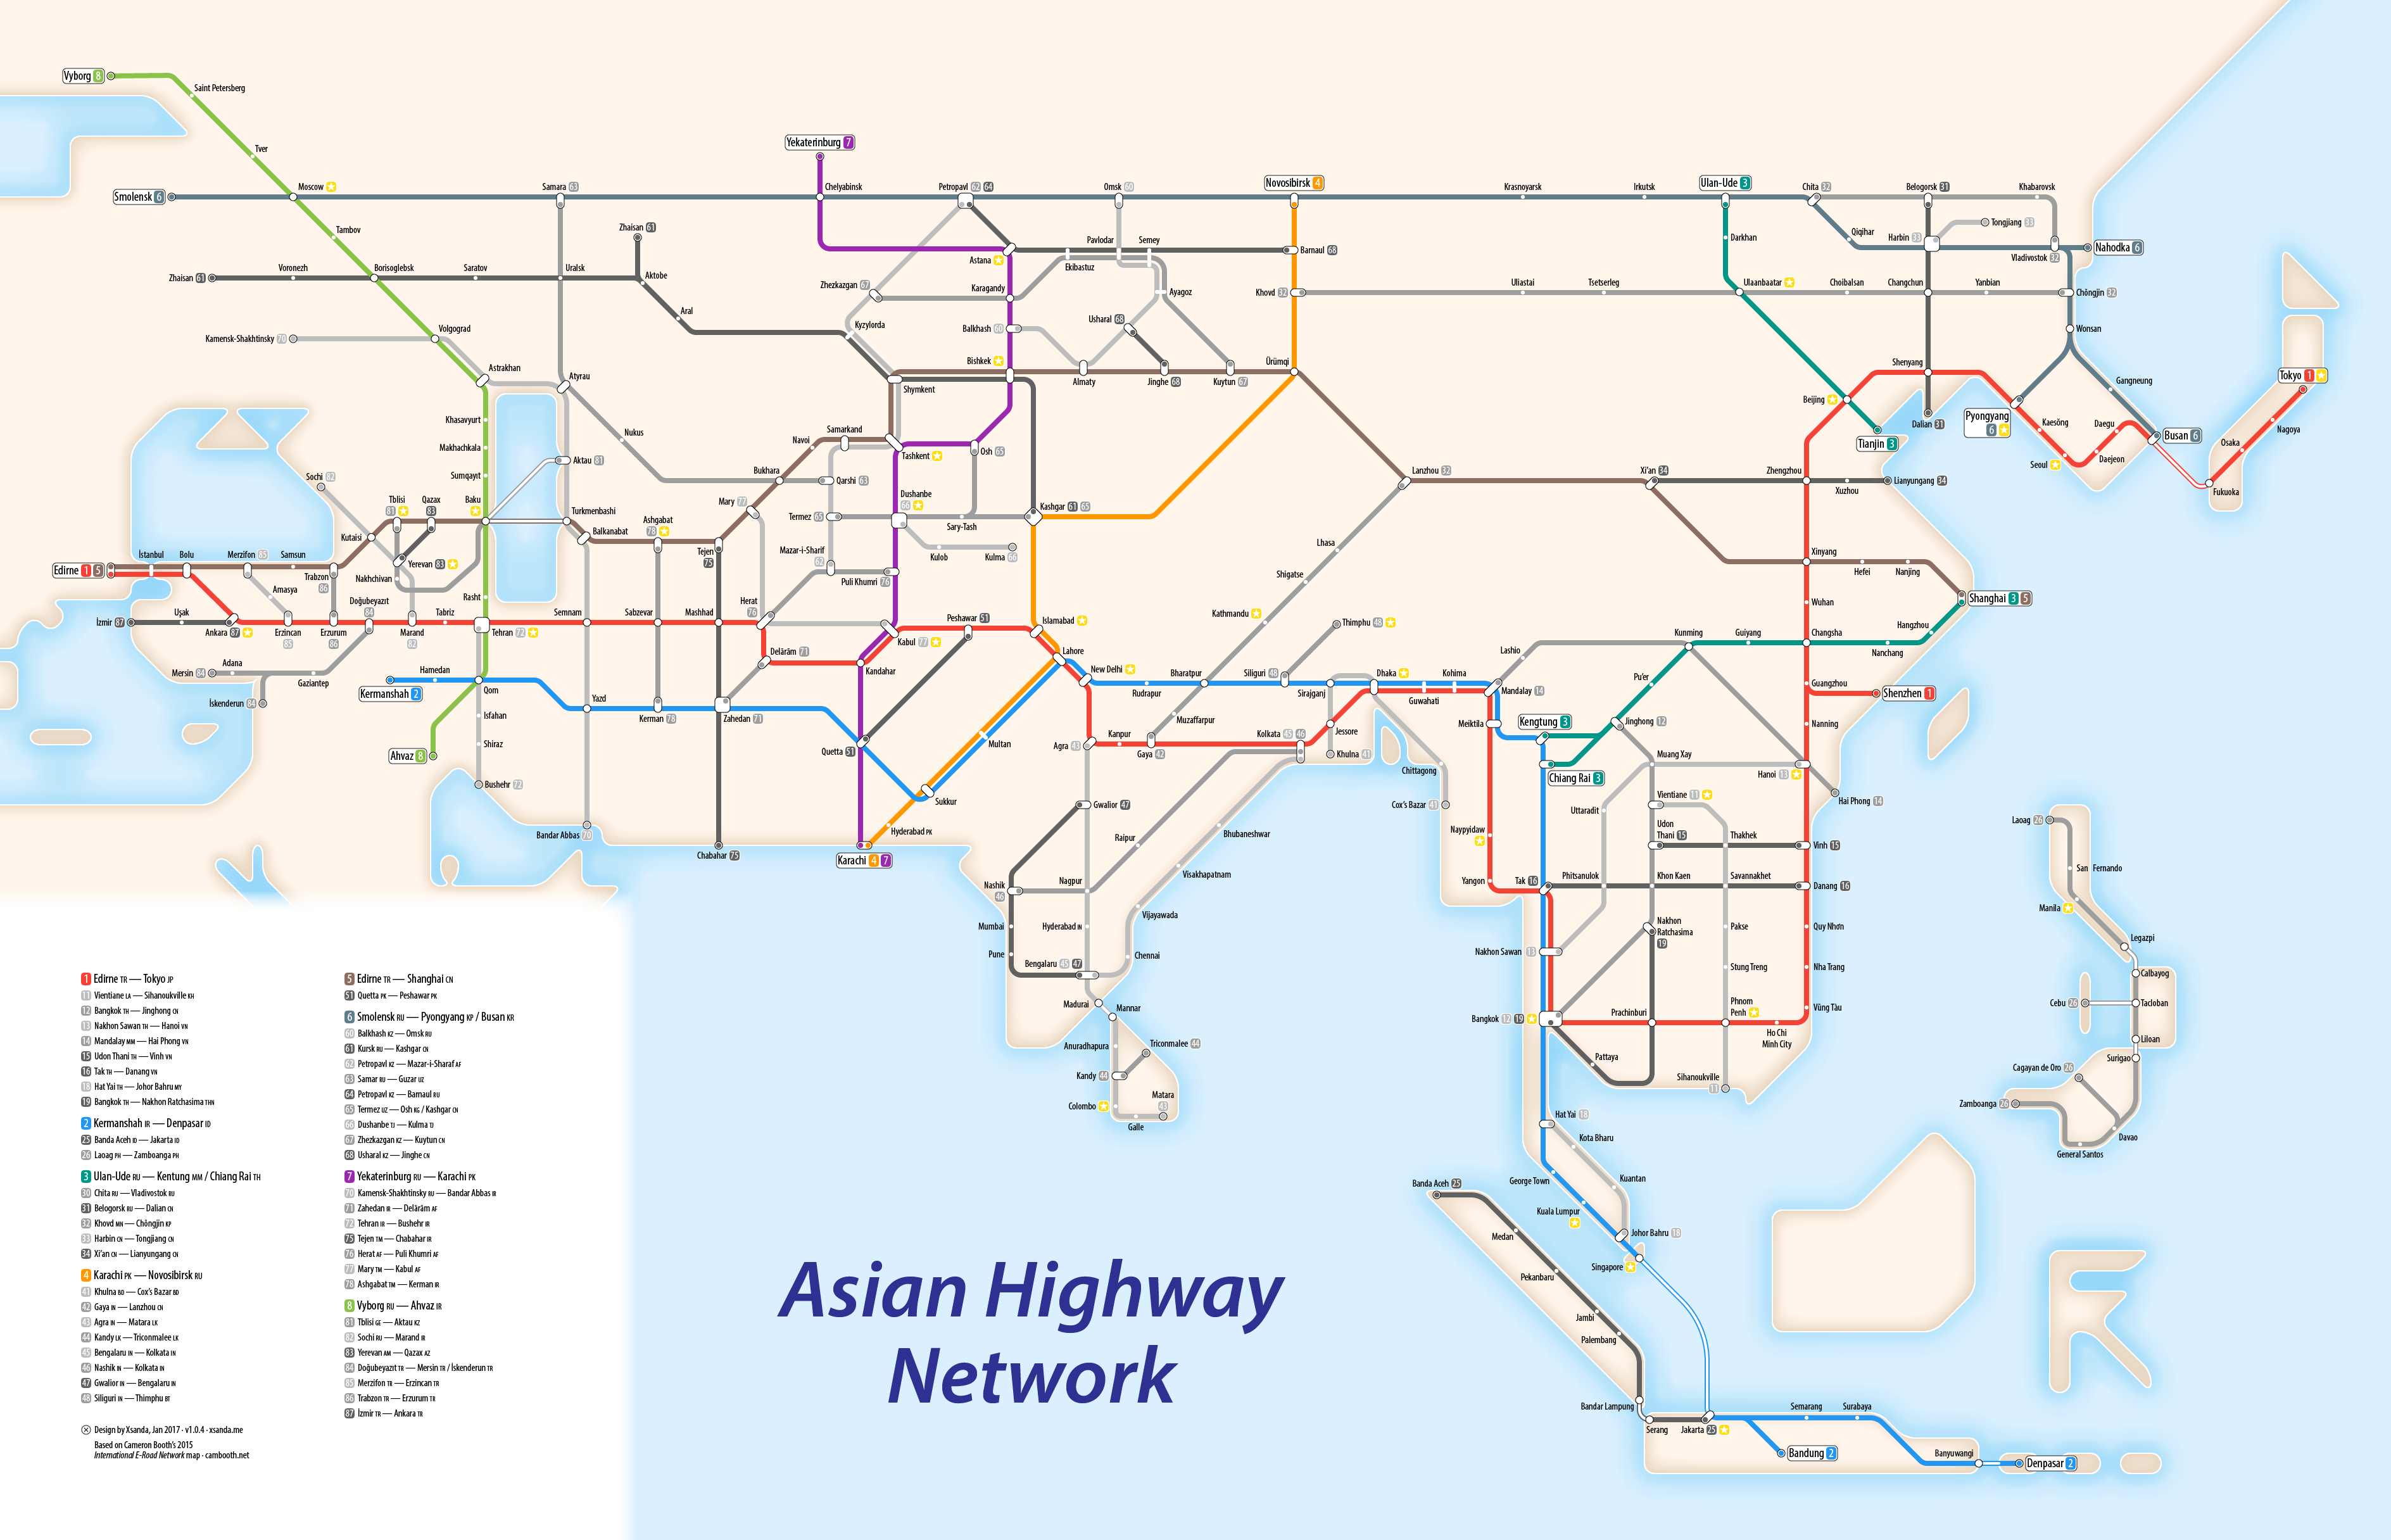 An overview map of the whole network